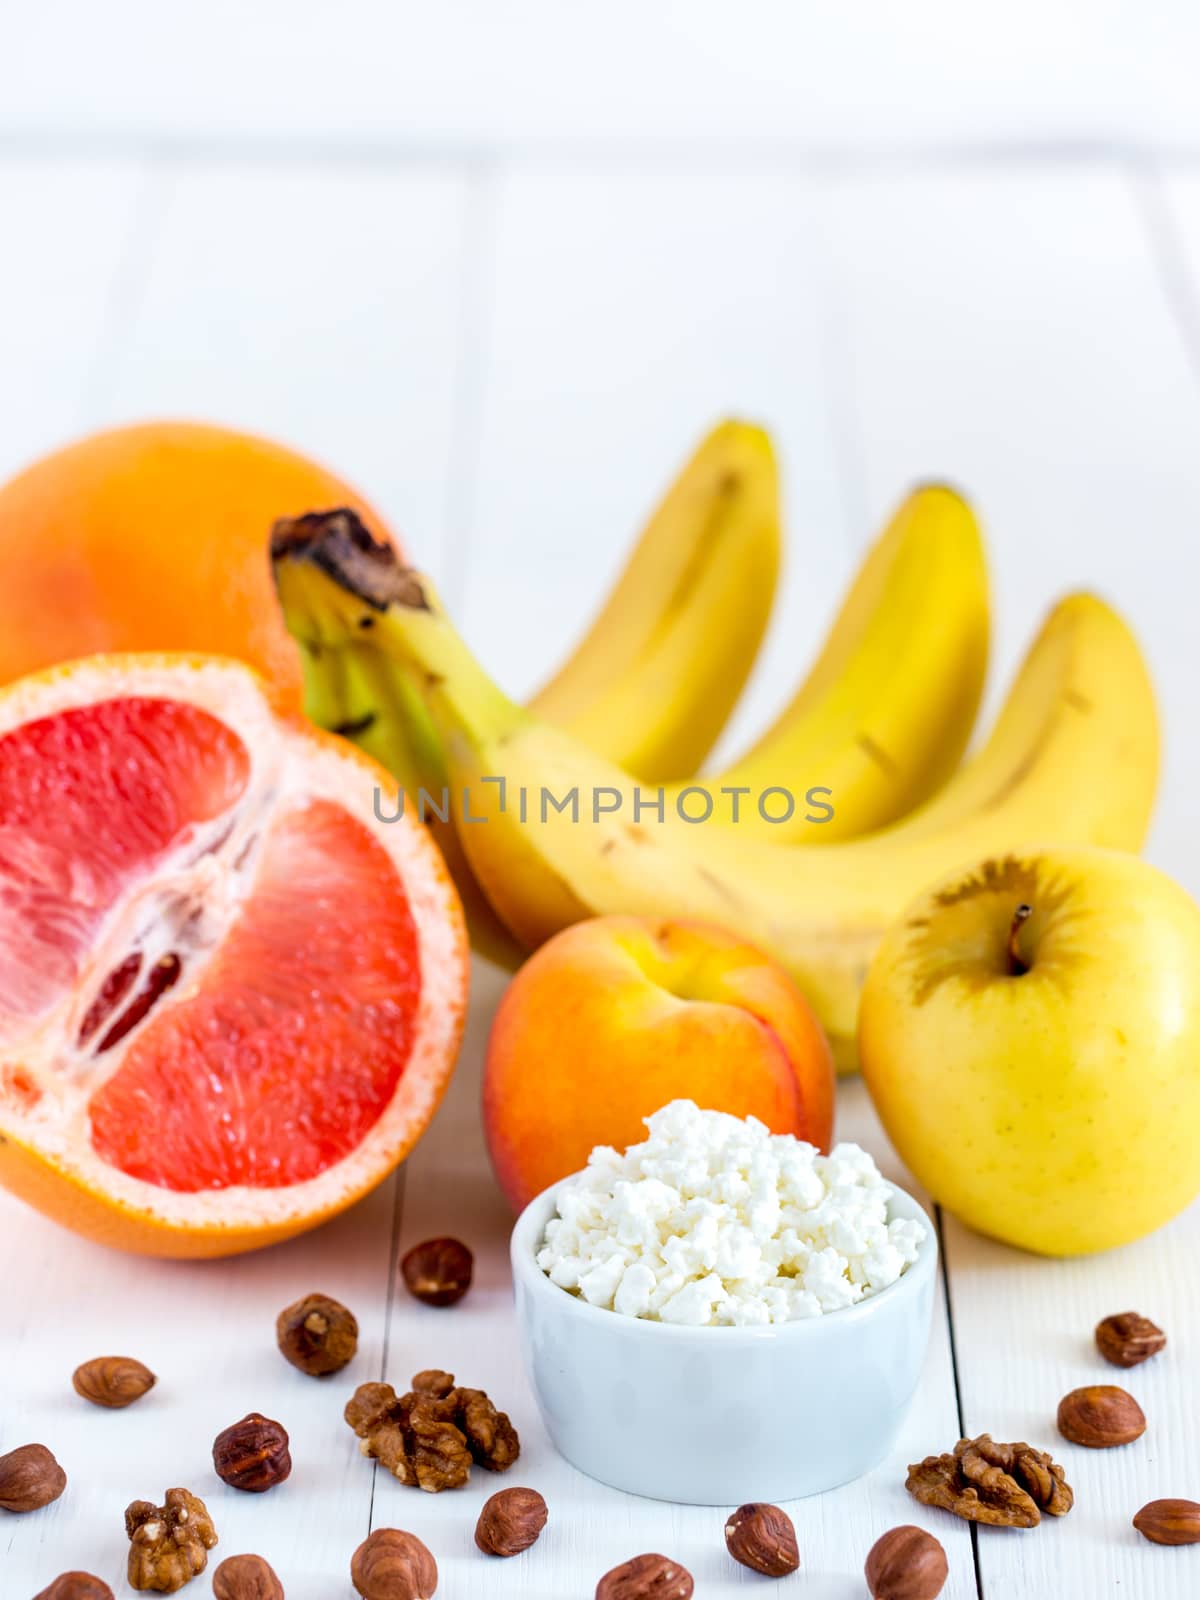 Healthy breakfast: cottage cheese, fruits and nuts on white wooden background. Dieting, healthy lifestyle concept meal. Vertical with copyspace